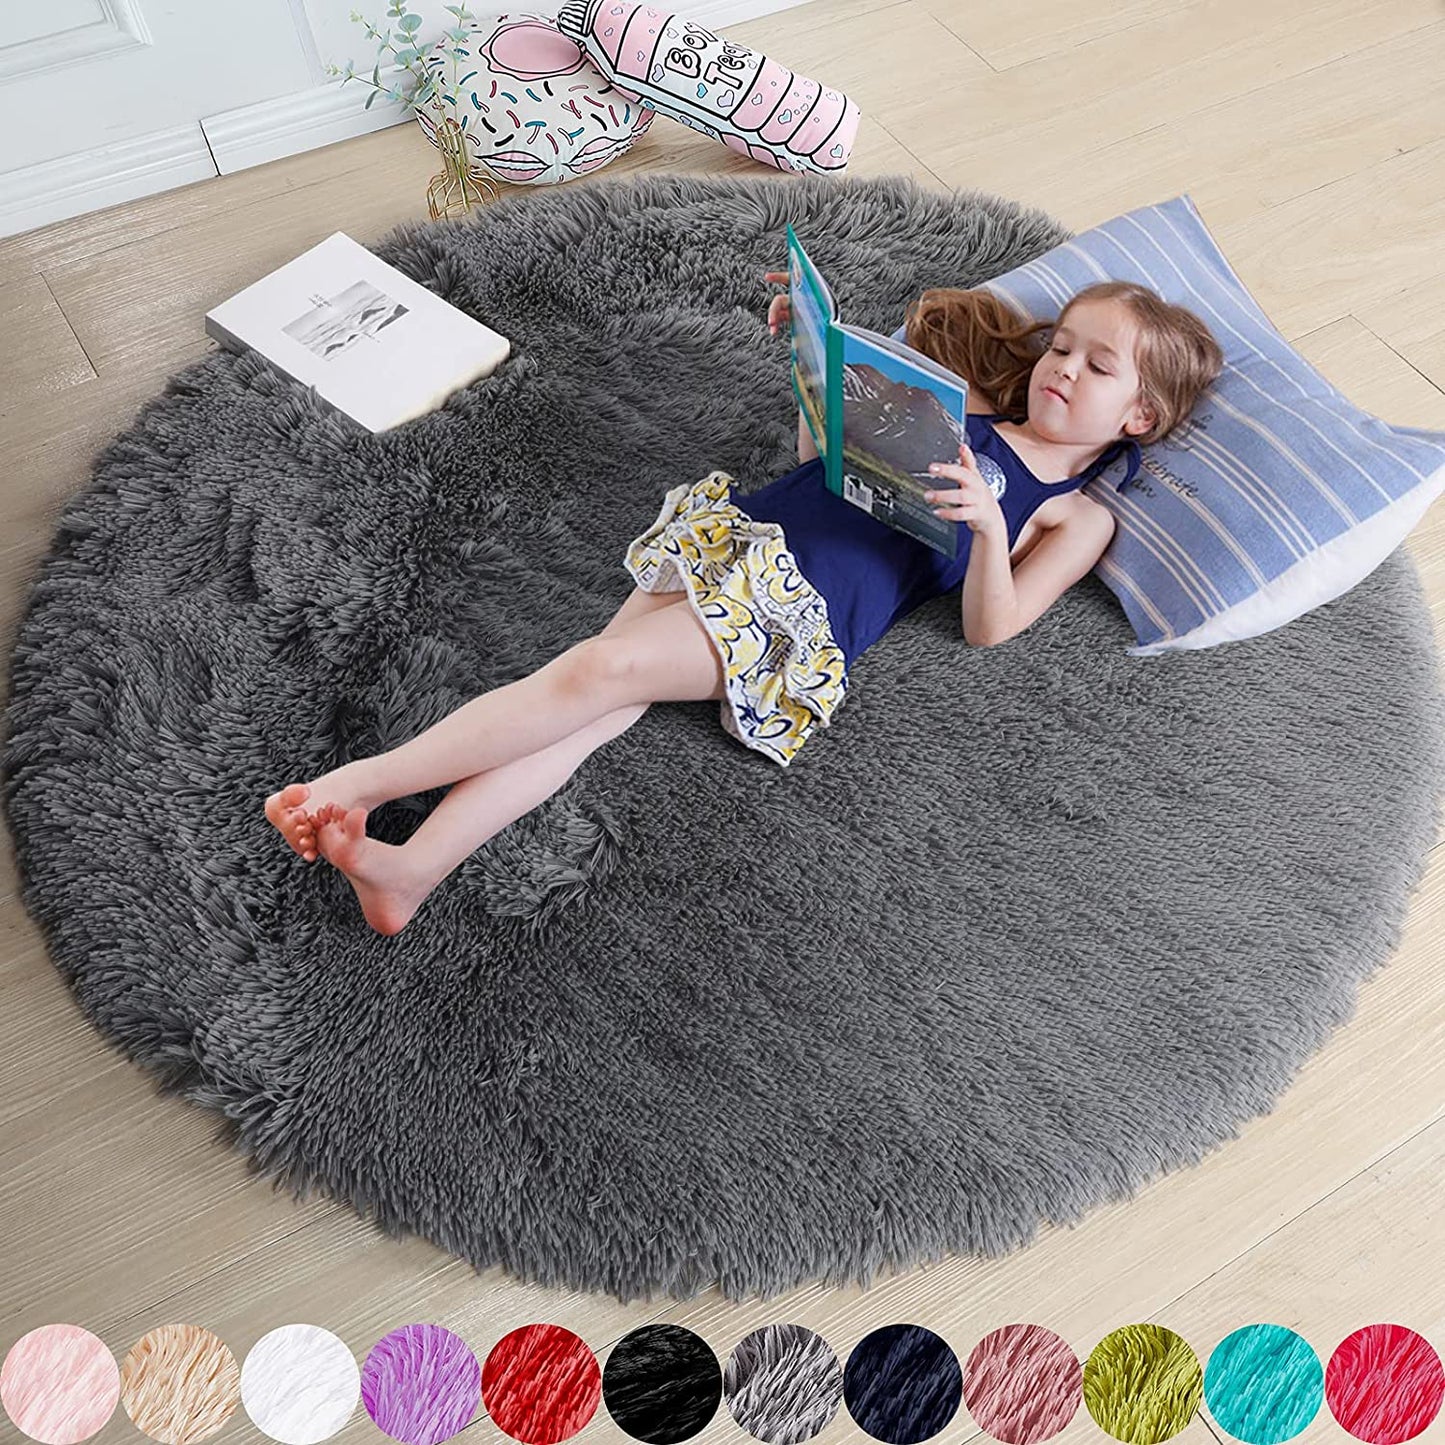 Gray round Rug for Bedroom,Fluffy Circle Rug 4'X4' for Kids Room,Furry Carpet for Teen'S Room,Shaggy Circular Rug for Nursery Room,Fuzzy Plush Rug for Dorm,Grey Carpet,Cute Room Decor for Baby